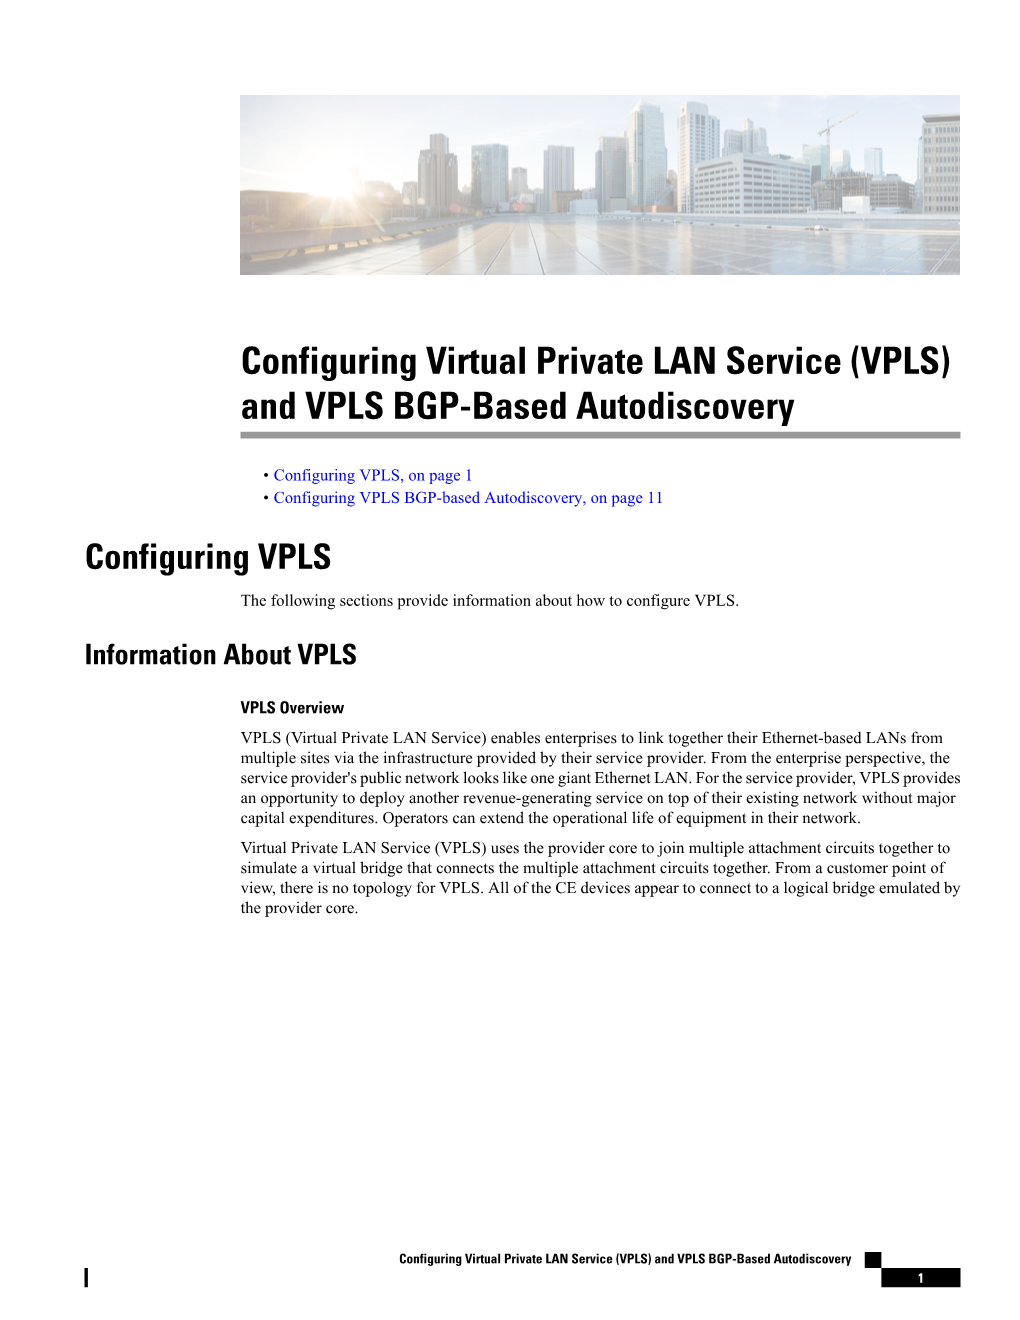 Configuring Virtual Private LAN Service (VPLS) and VPLS BGP-Based Autodiscovery